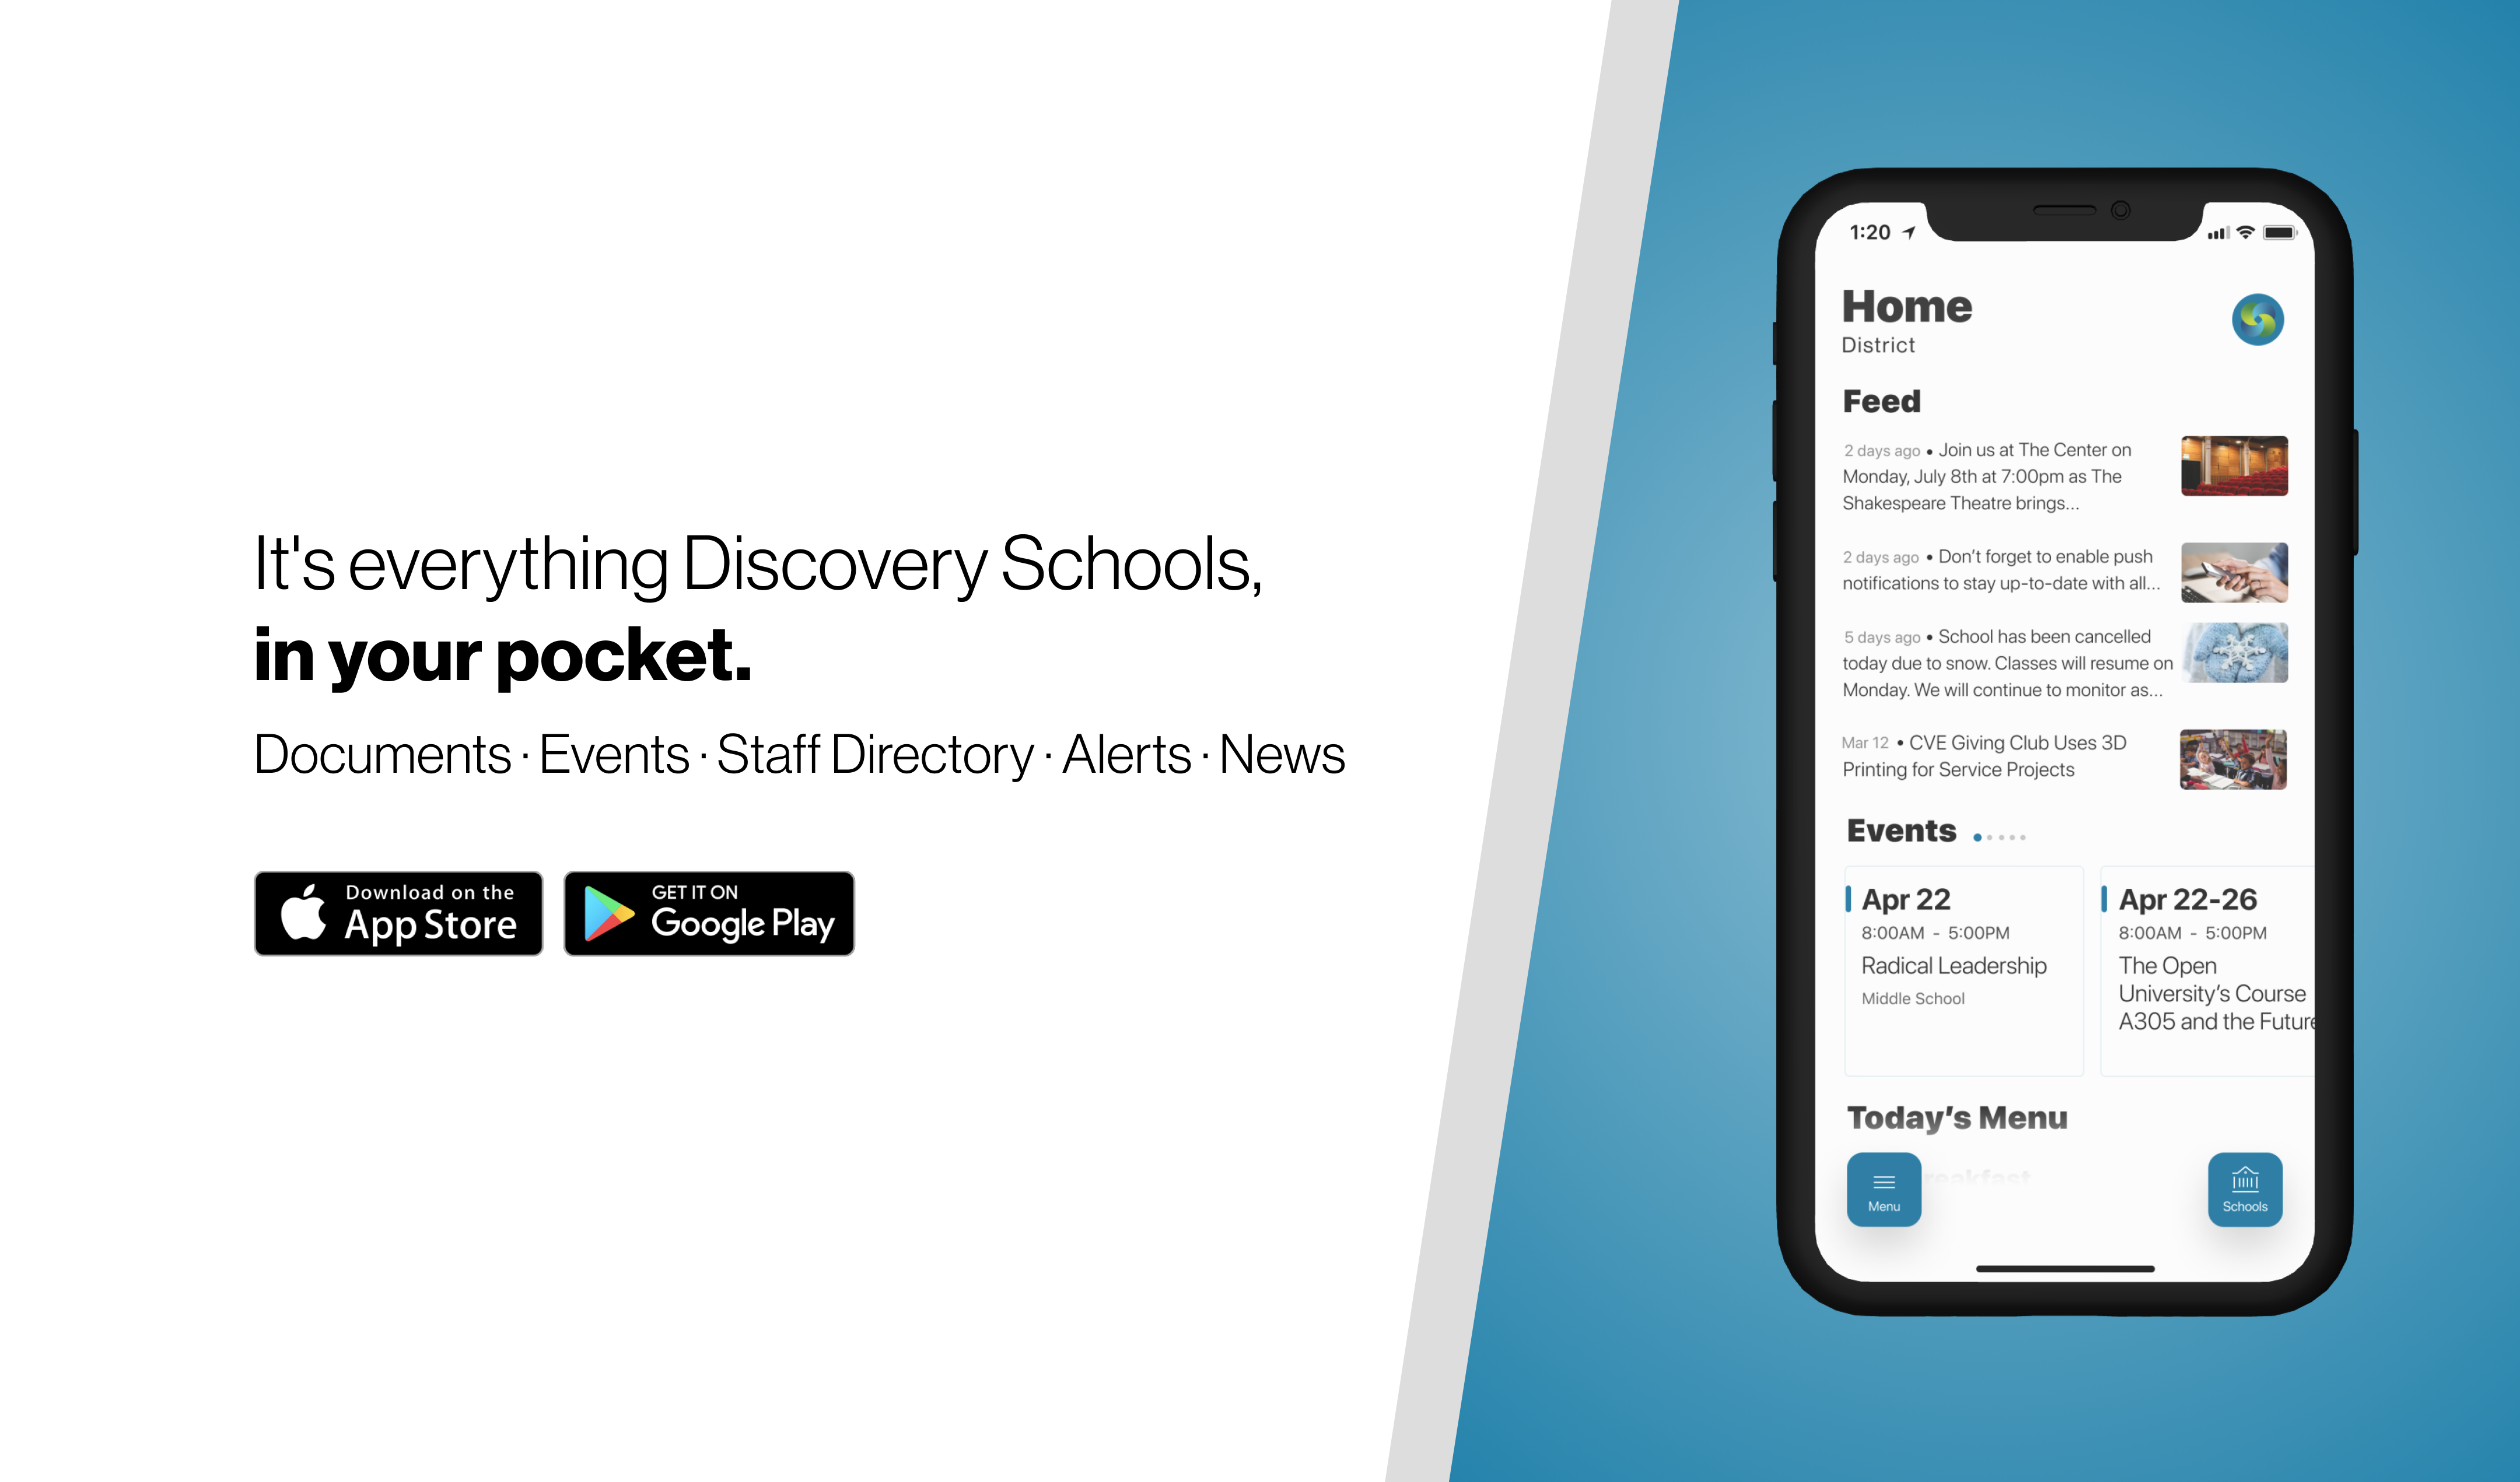 App Store and Google Play Discovery School app: It's everything Discovery Schools, in your pocket. Documents, Events, Staff Directory, Alerts,News. 